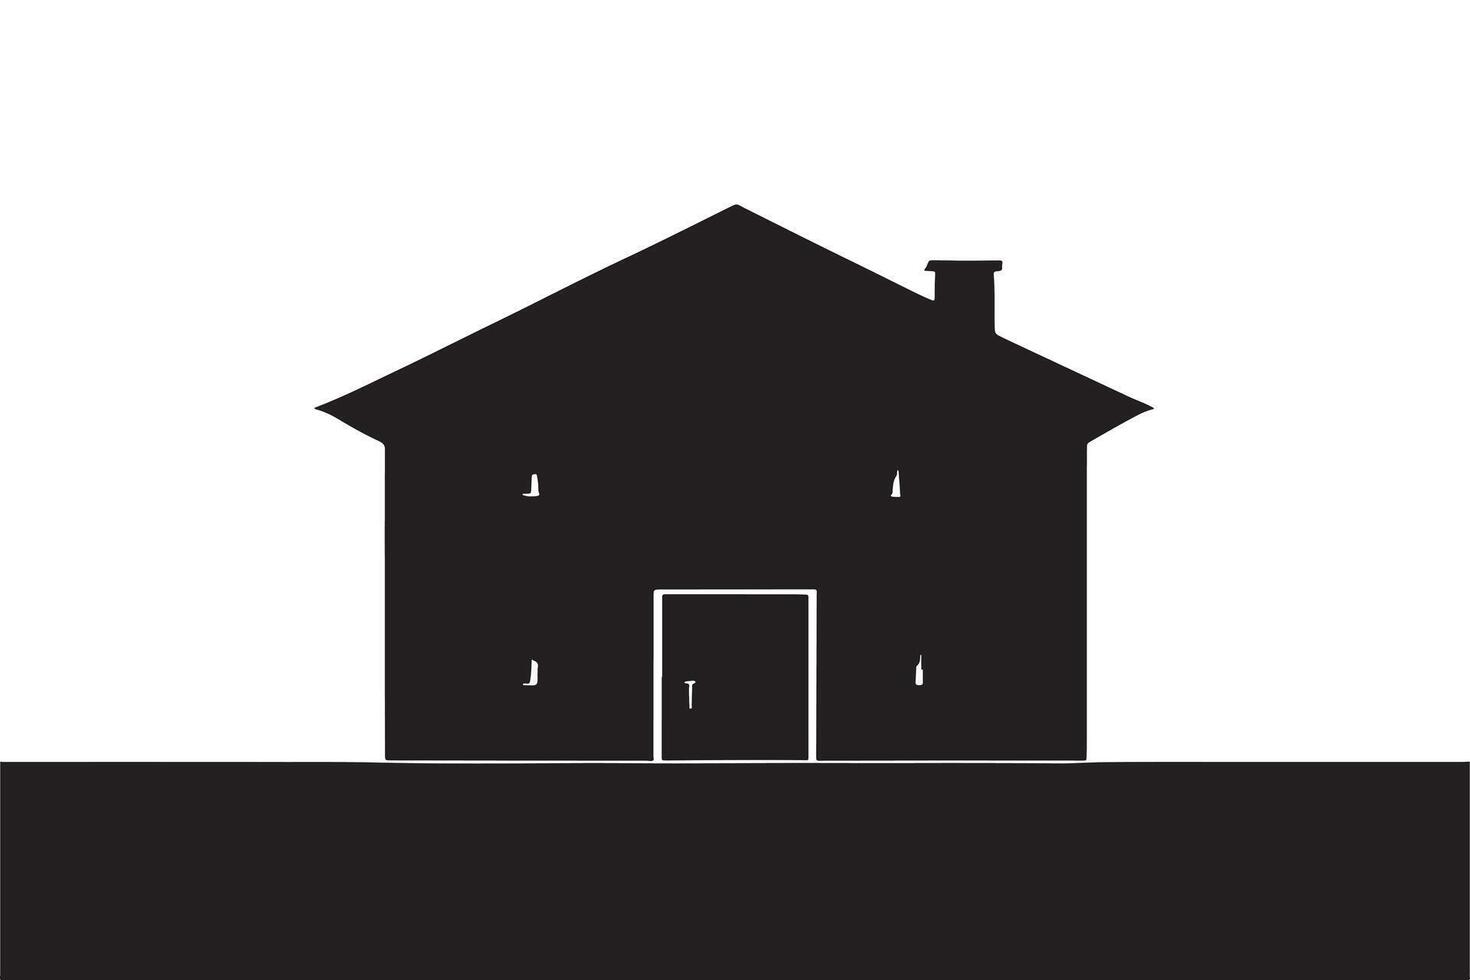 home or house black image texture on white background. illustration to print for commercial use. EPS 10 vector